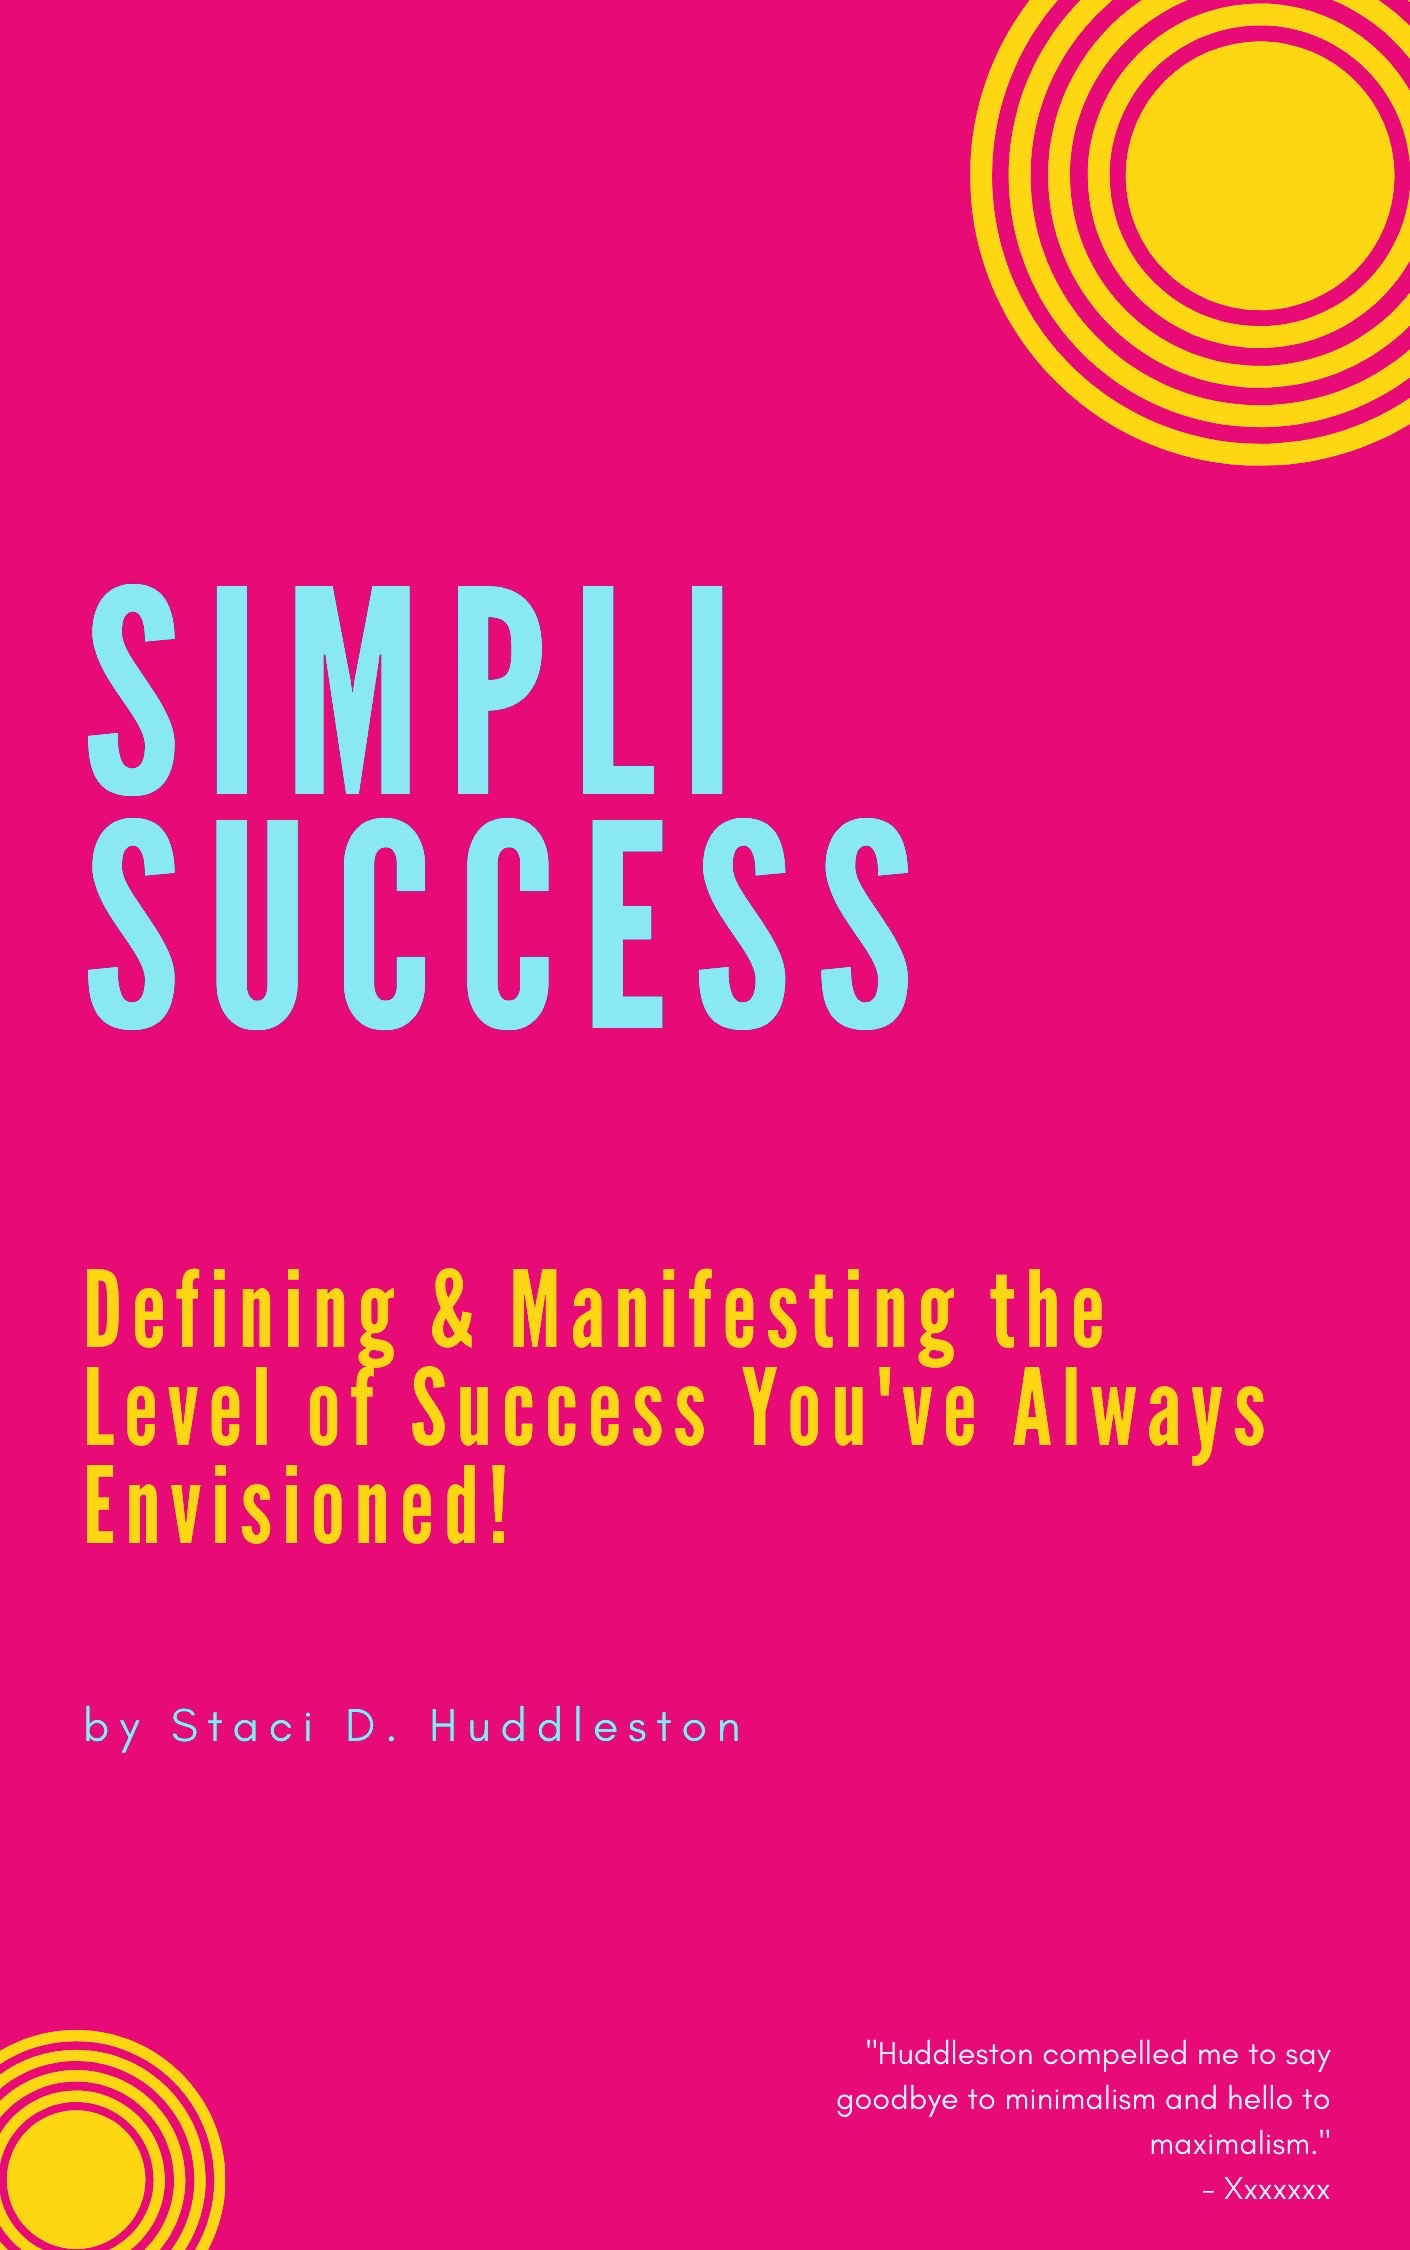 Secure Success: Defining & Manifesting the Level of Success You’ve Always Envisioned!